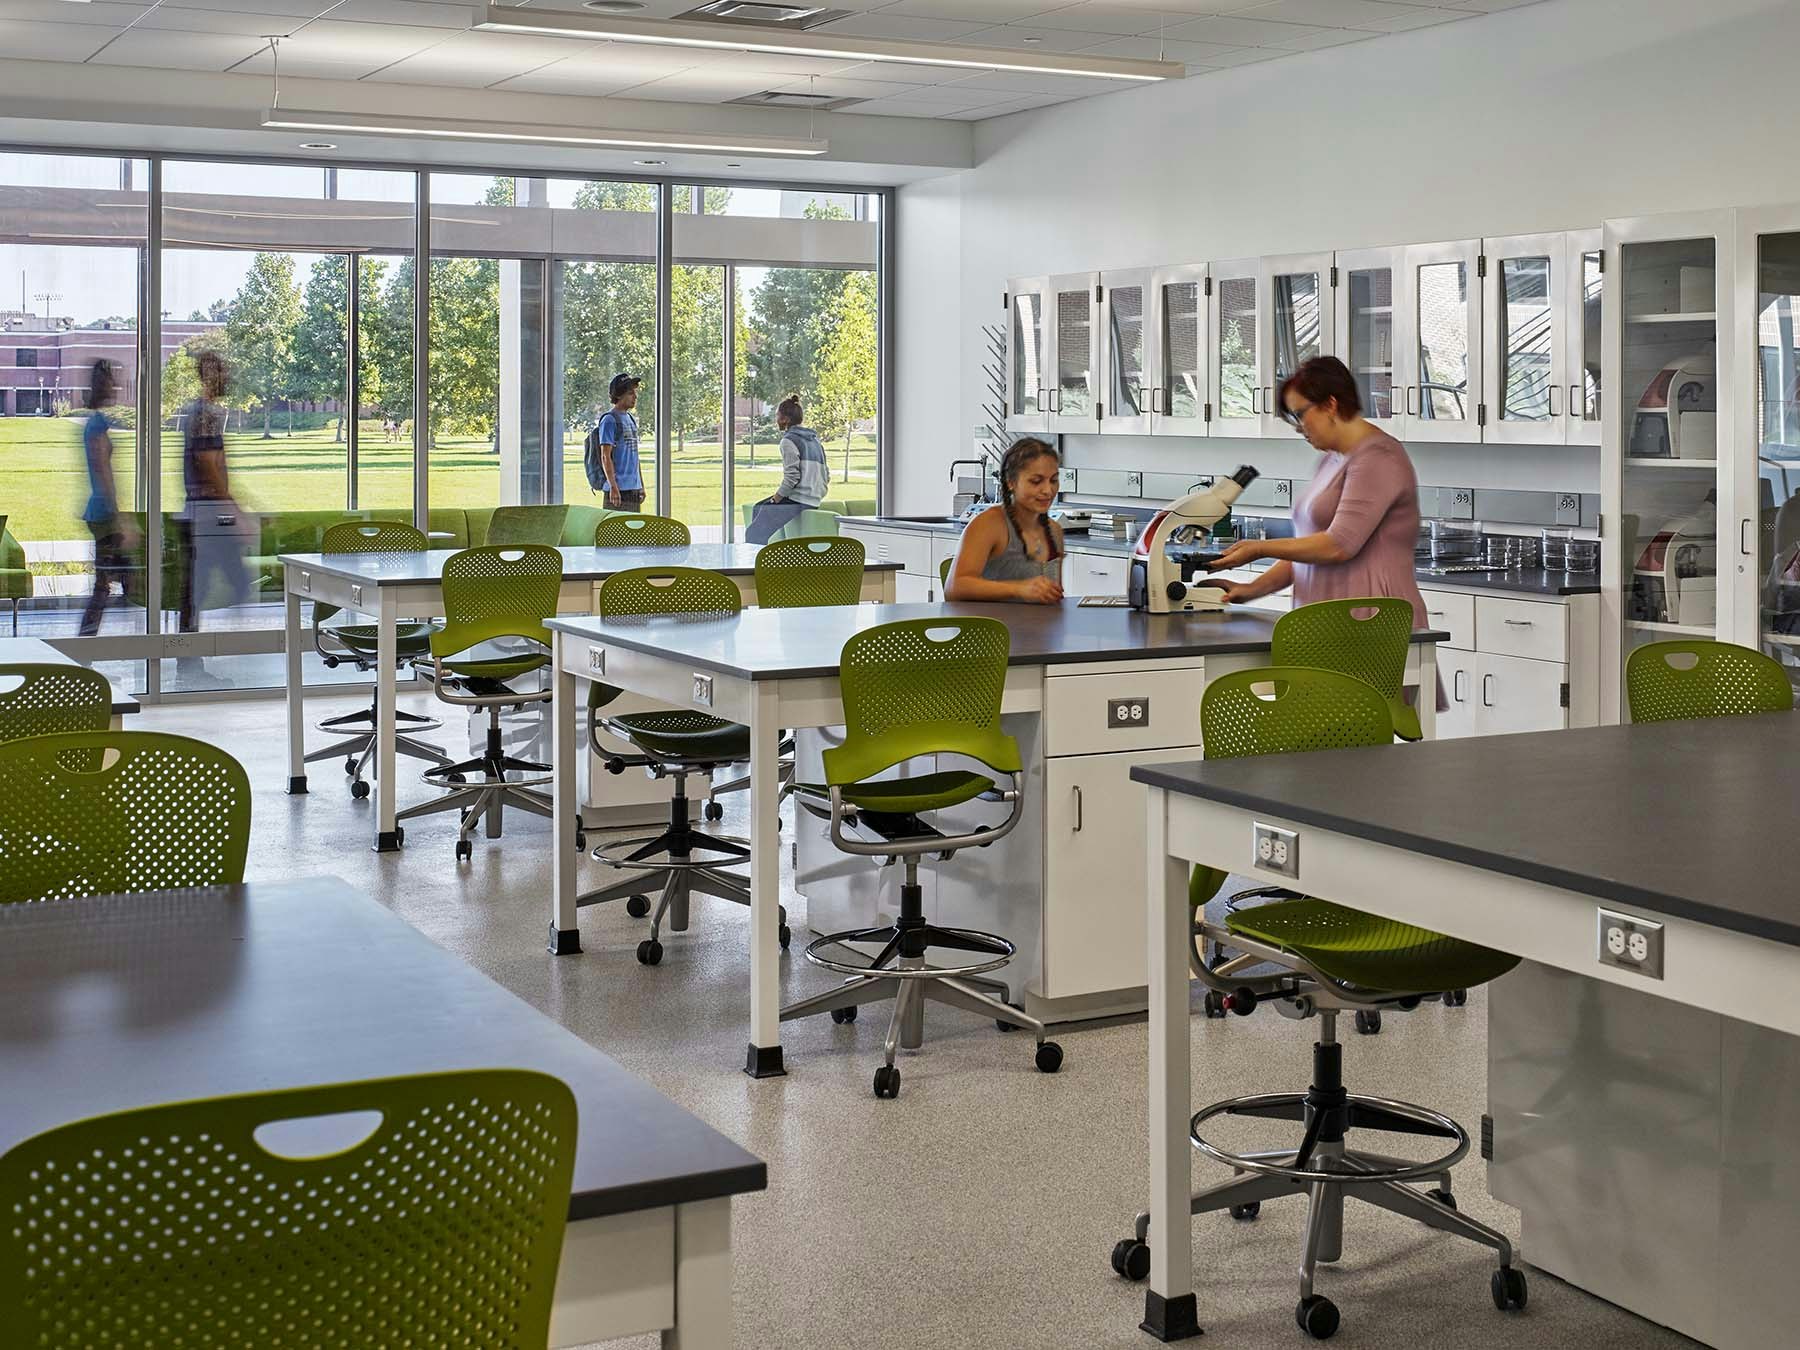 Formal and informal group study spaces are located throughout the building. These classrooms and common spaces will be accessible to non-science majors and provide opportunities for all students to develop a closer connection to the sciences.